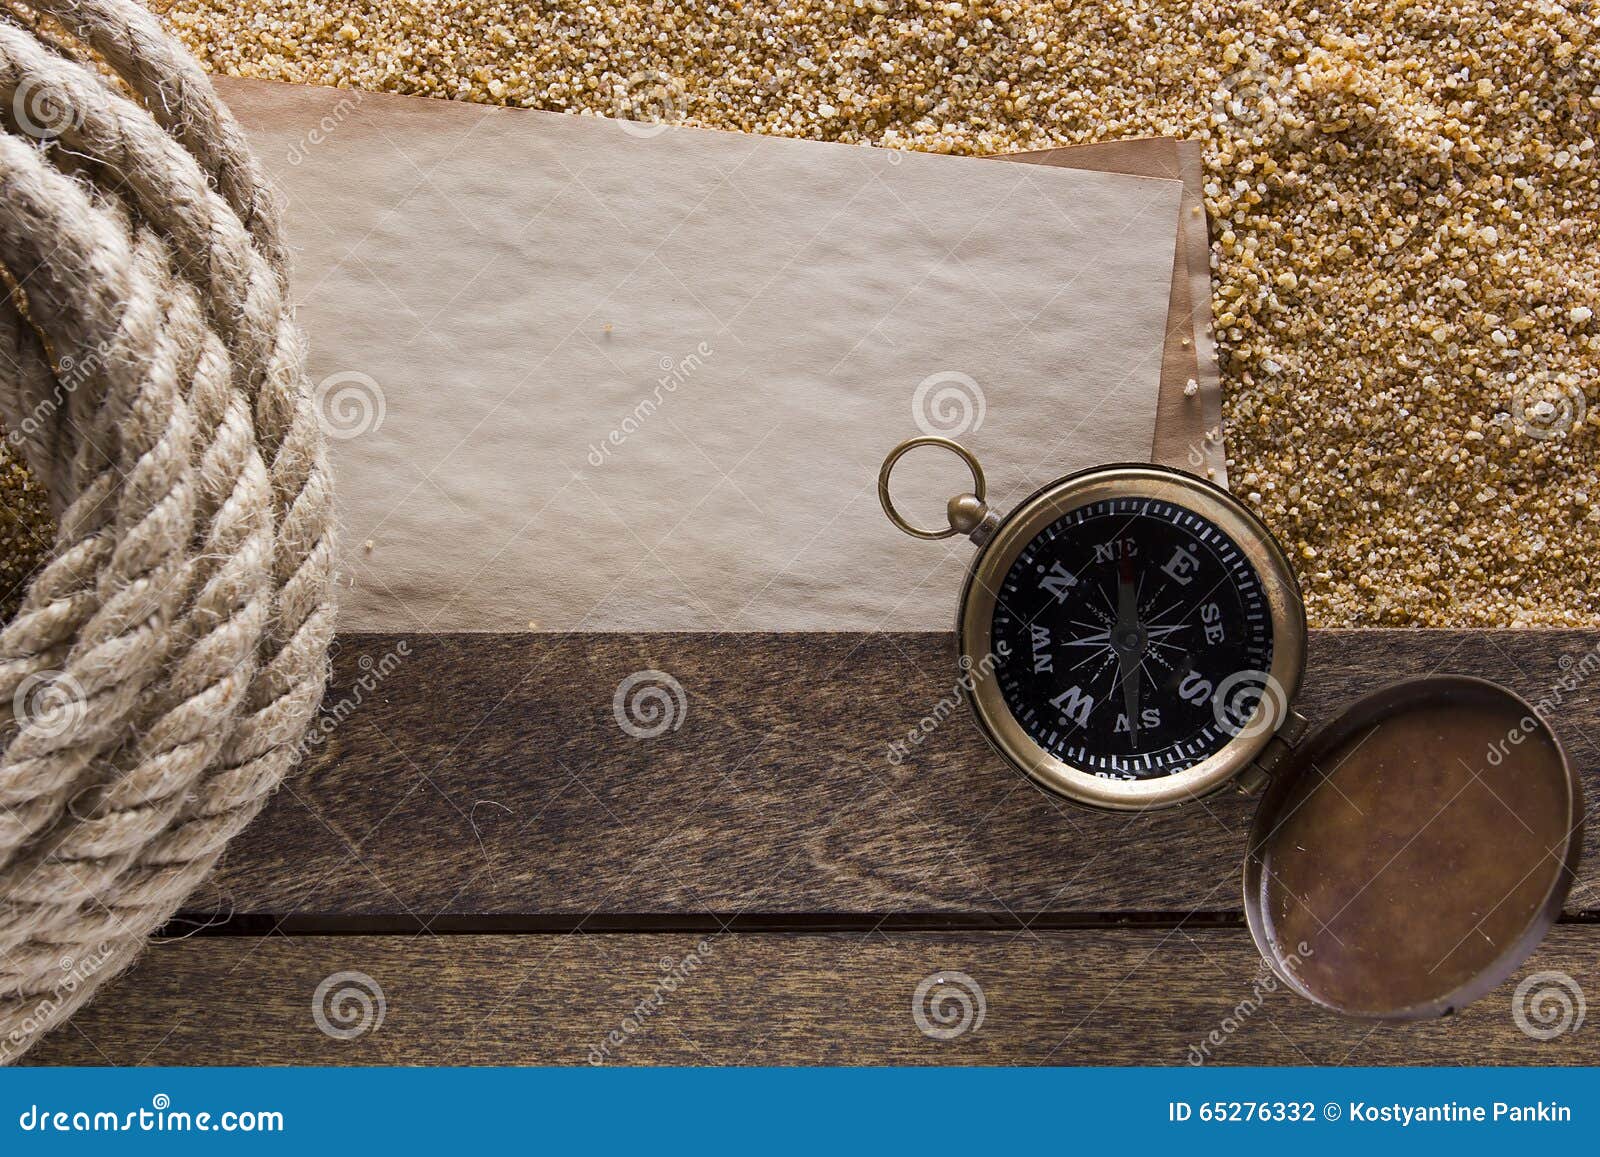 https://thumbs.dreamstime.com/z/twisted-jute-rope-compass-navigation-old-paper-information-65276332.jpg